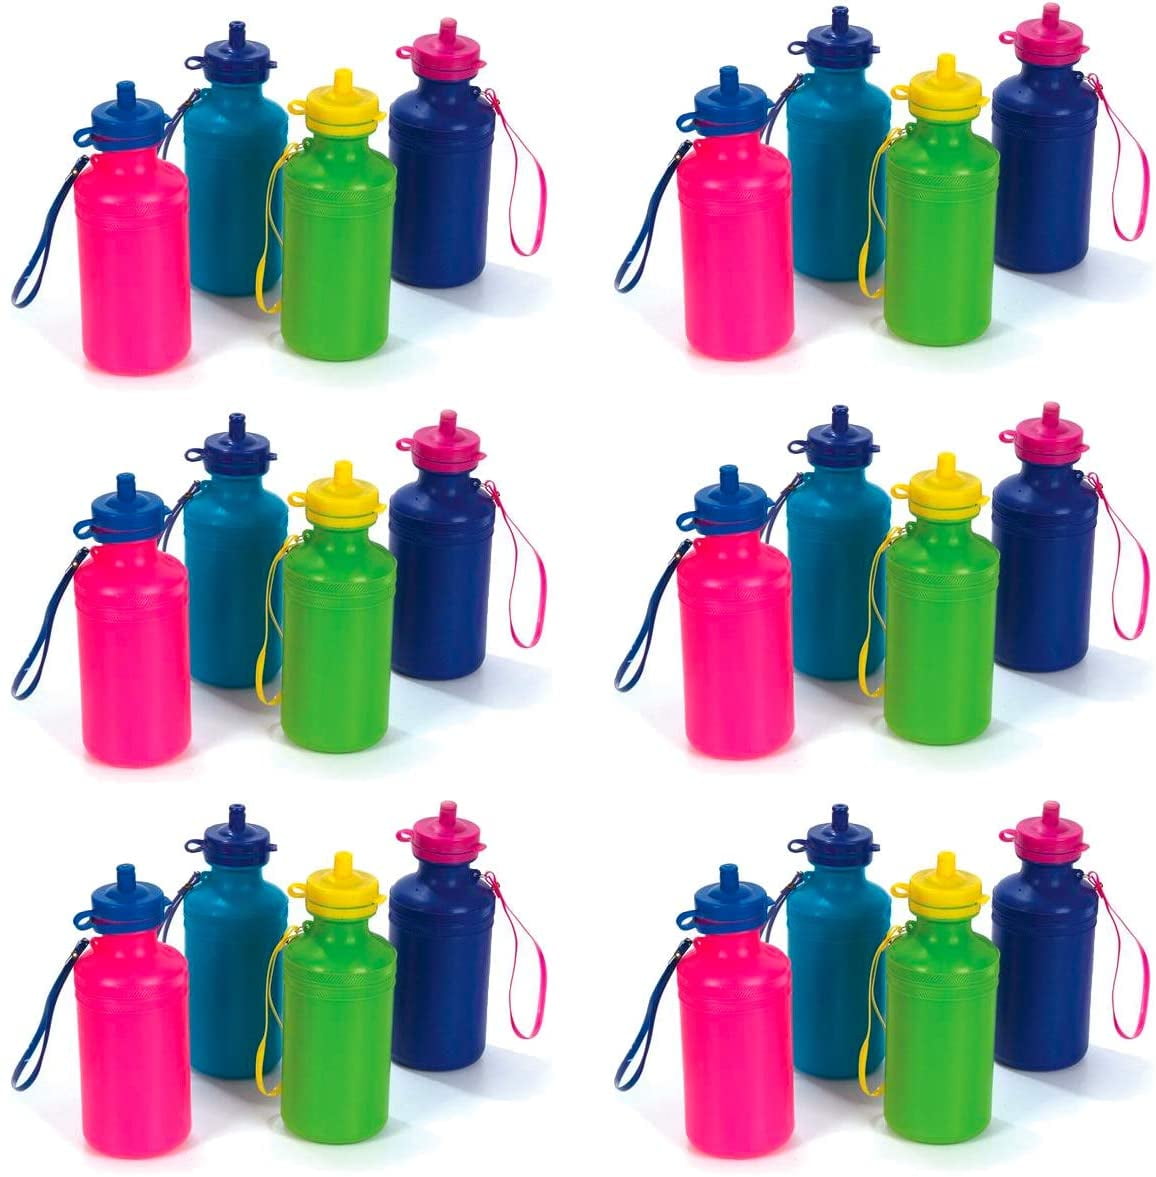 144 Neon Water Sports Bottles for Bikes | MEGA Bulk Pack, 7.5 inches, Wrist  Strap | Awesome Summer B…See more 144 Neon Water Sports Bottles for Bikes